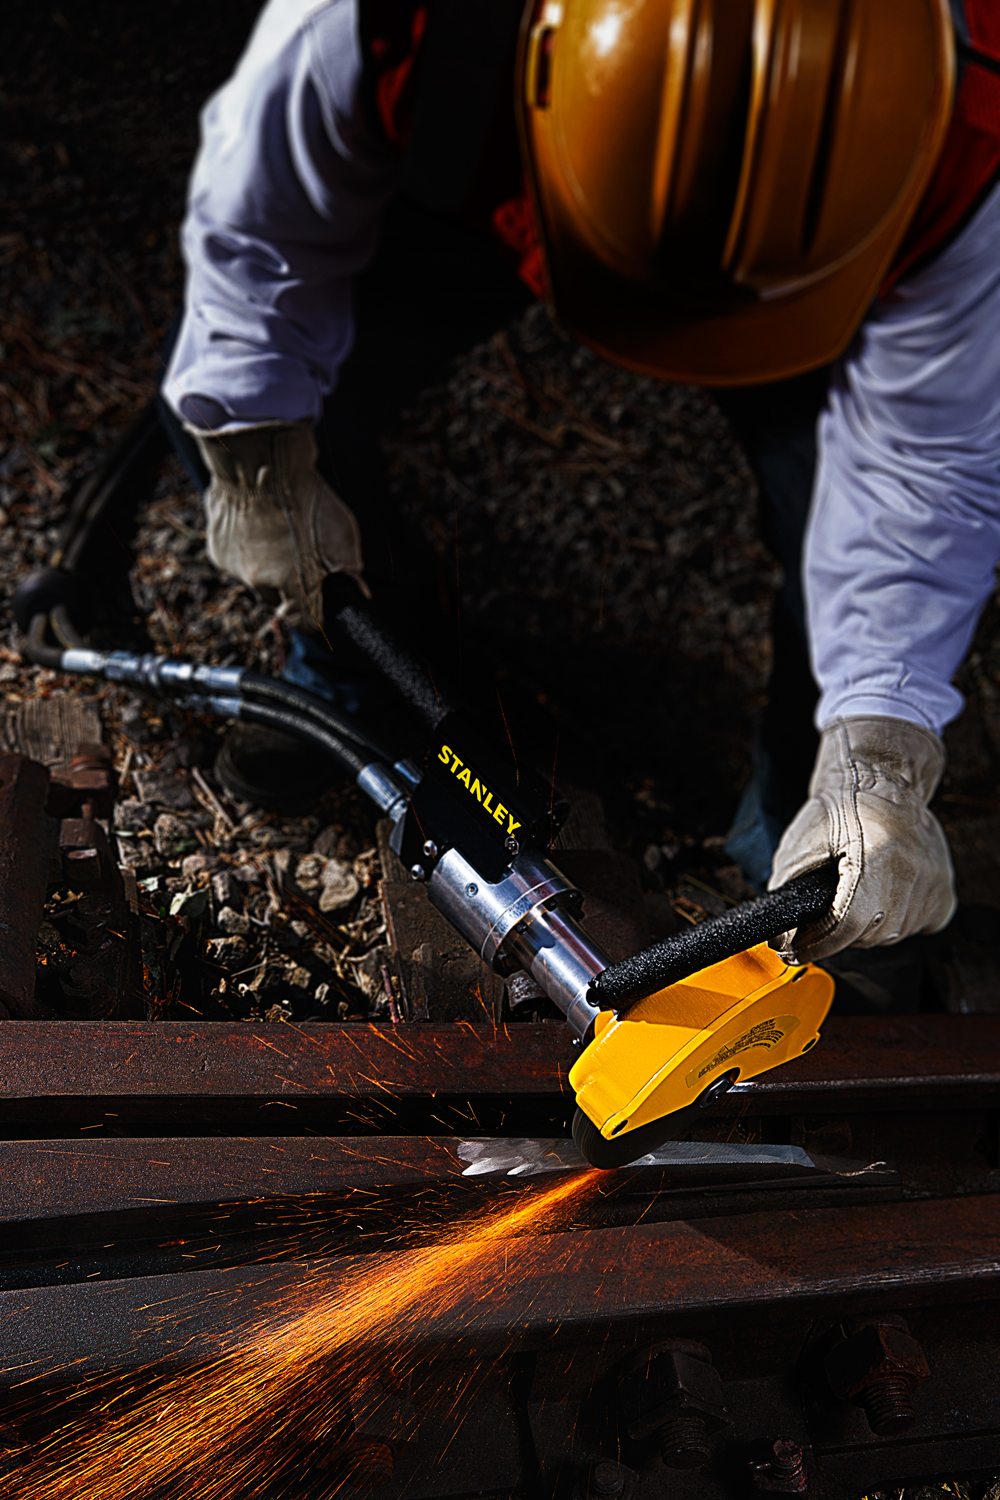 Construction worker polishing rust off railroad tie with Stanley pneumatic grinder tool, making sparks